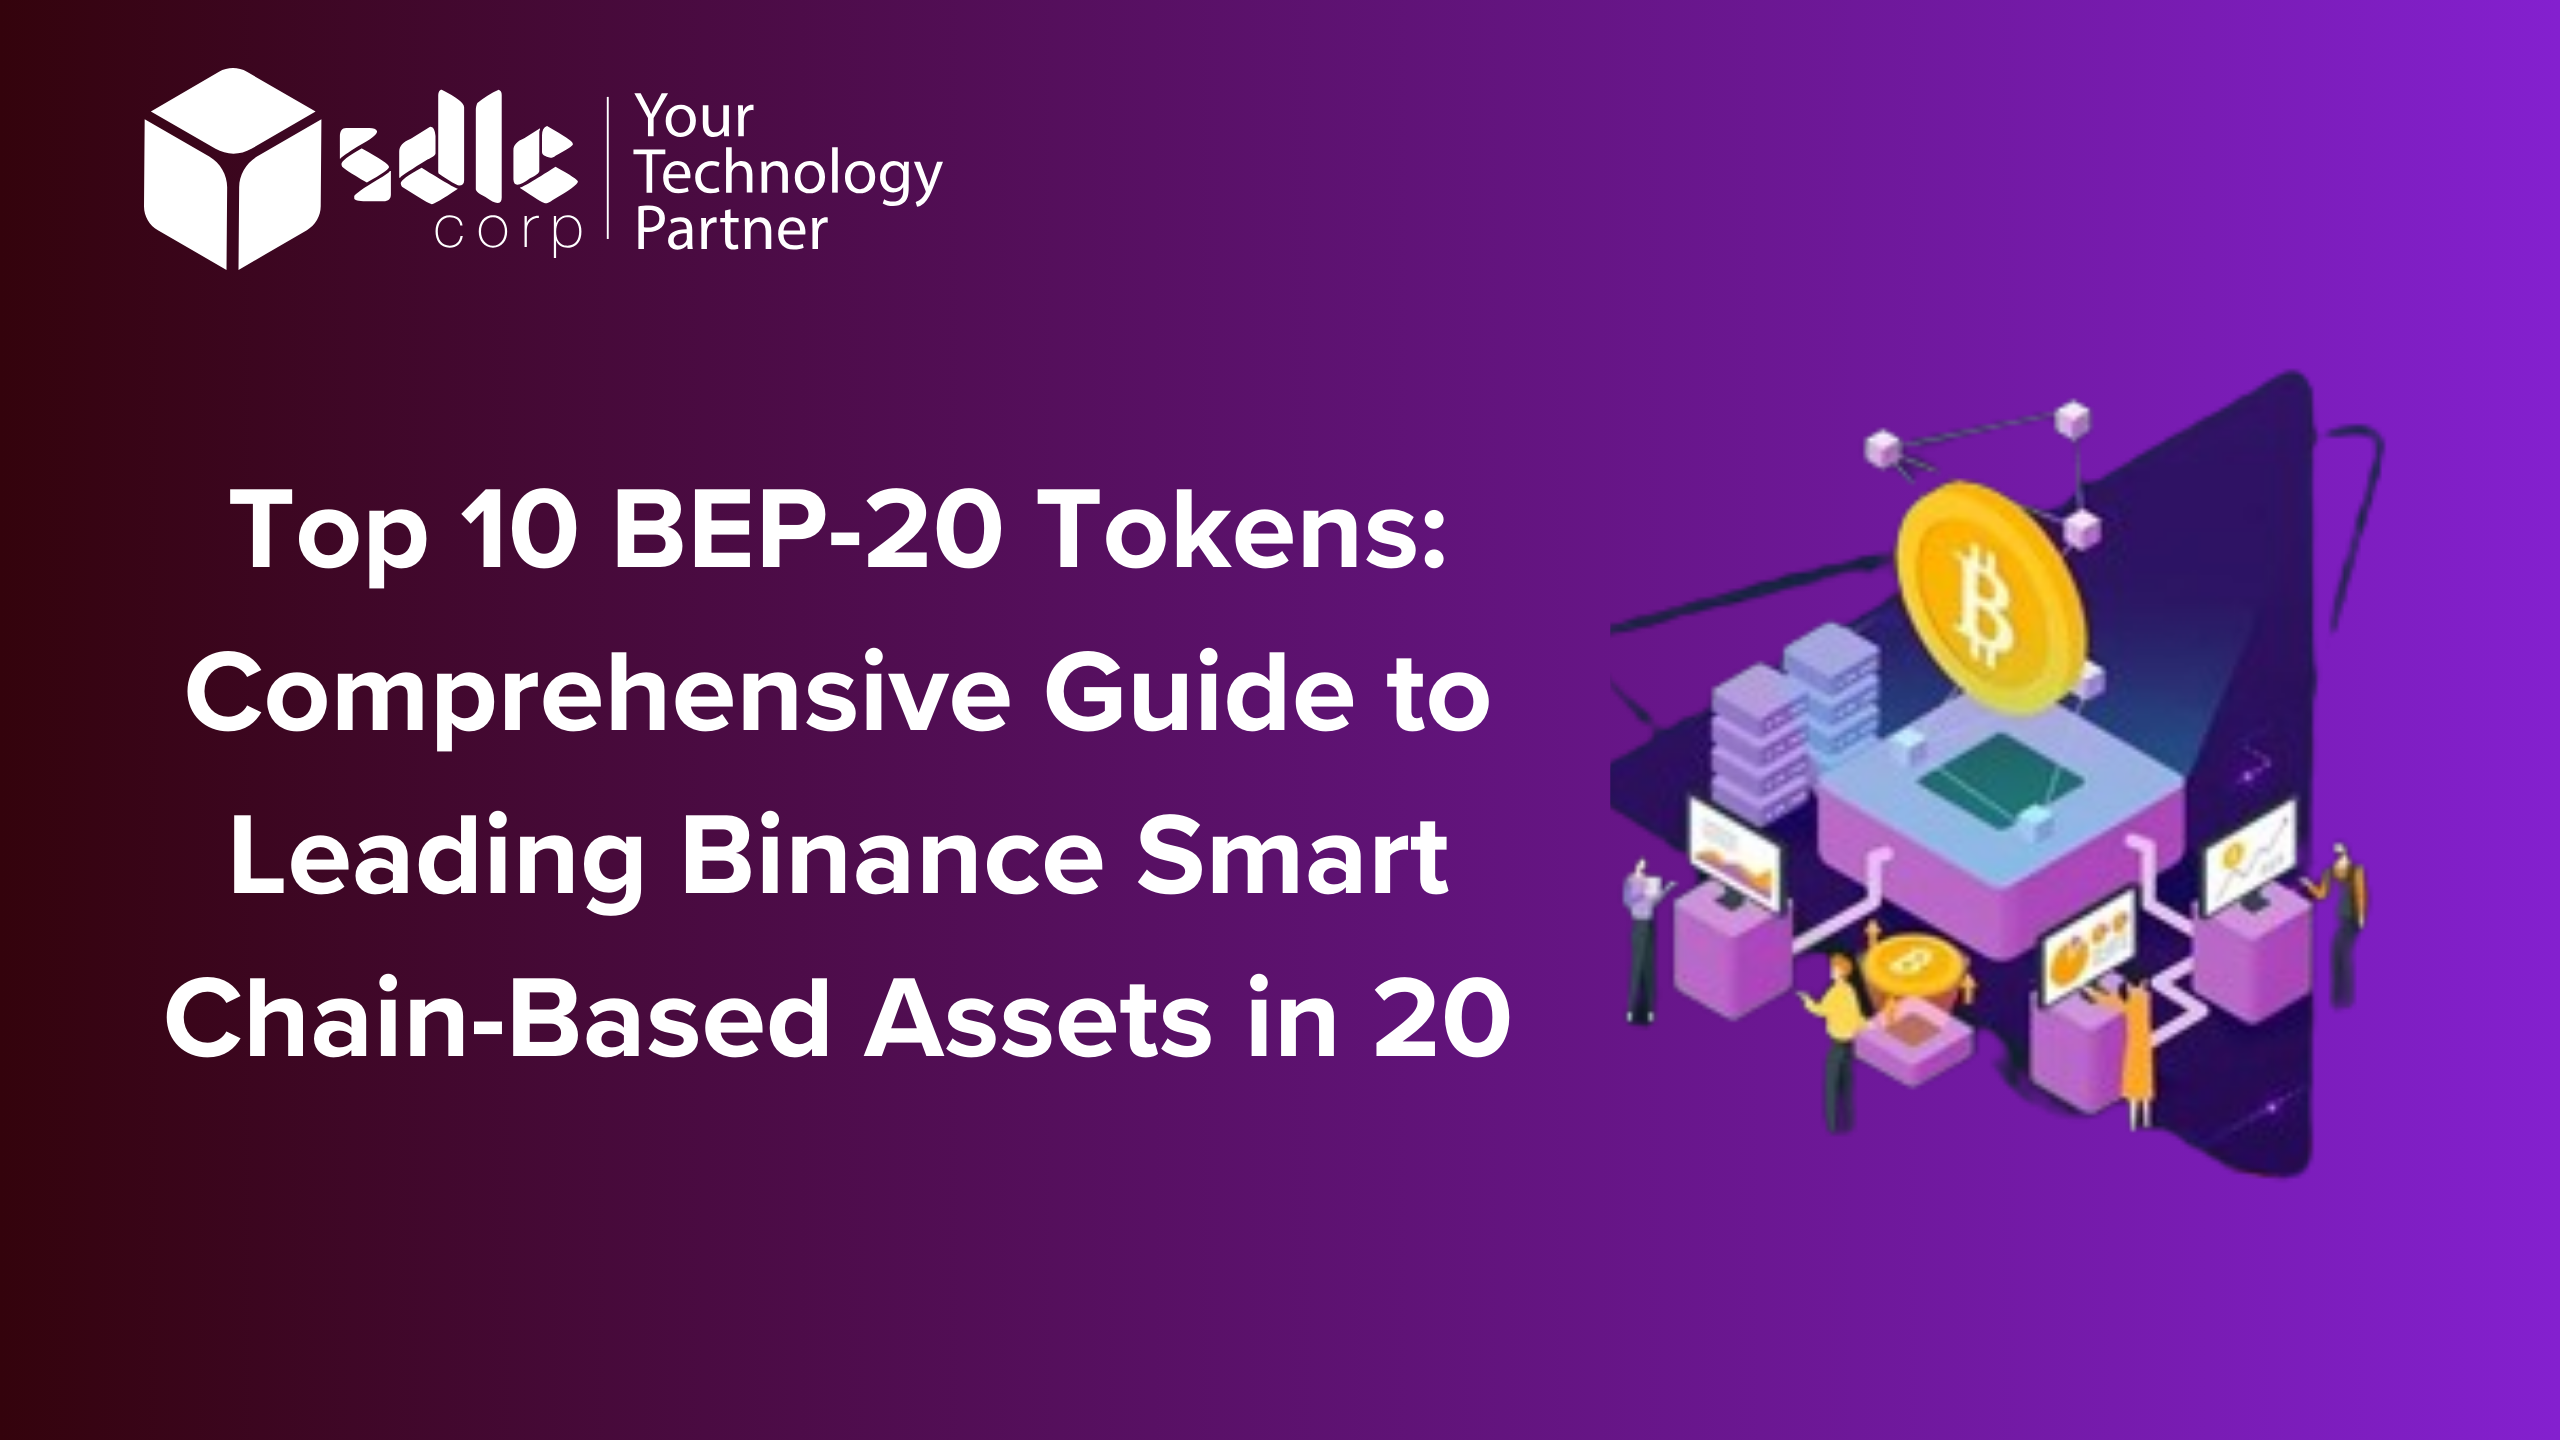 Top 10 BEP-20 Tokens: Comprehensive Guide to Leading Binance Smart Chain-Based Assets in 2024